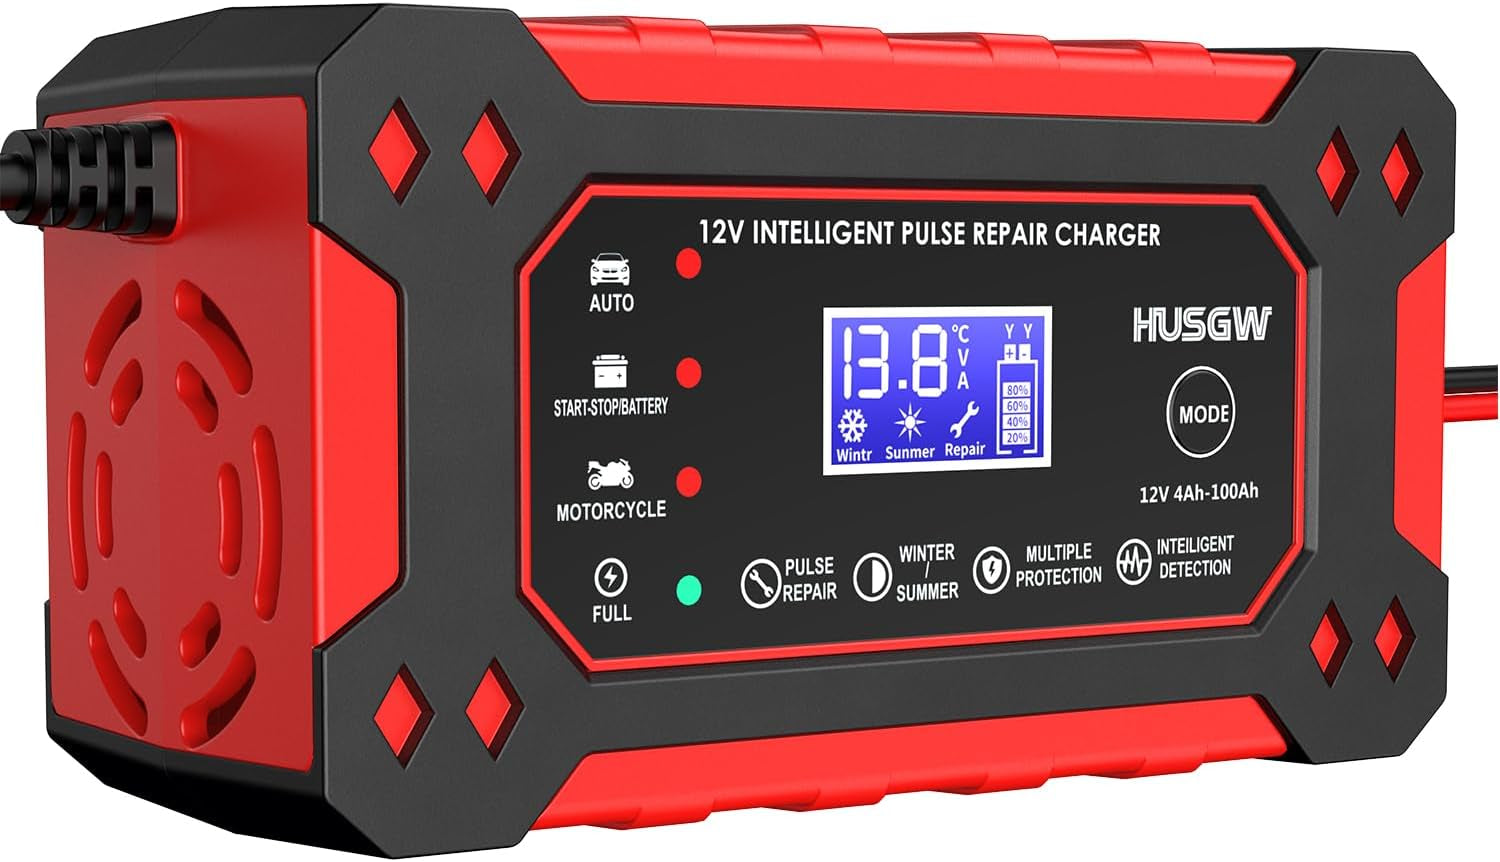 Car Battery Charger, 12V 6A Smart Battery Trickle Charger Automotive 12V Battery Maintainer Desulfator with Pulse Repair Temp Compensation for Car Truck Motorcycle Lawn Mower Boat Lead Acid Batteries